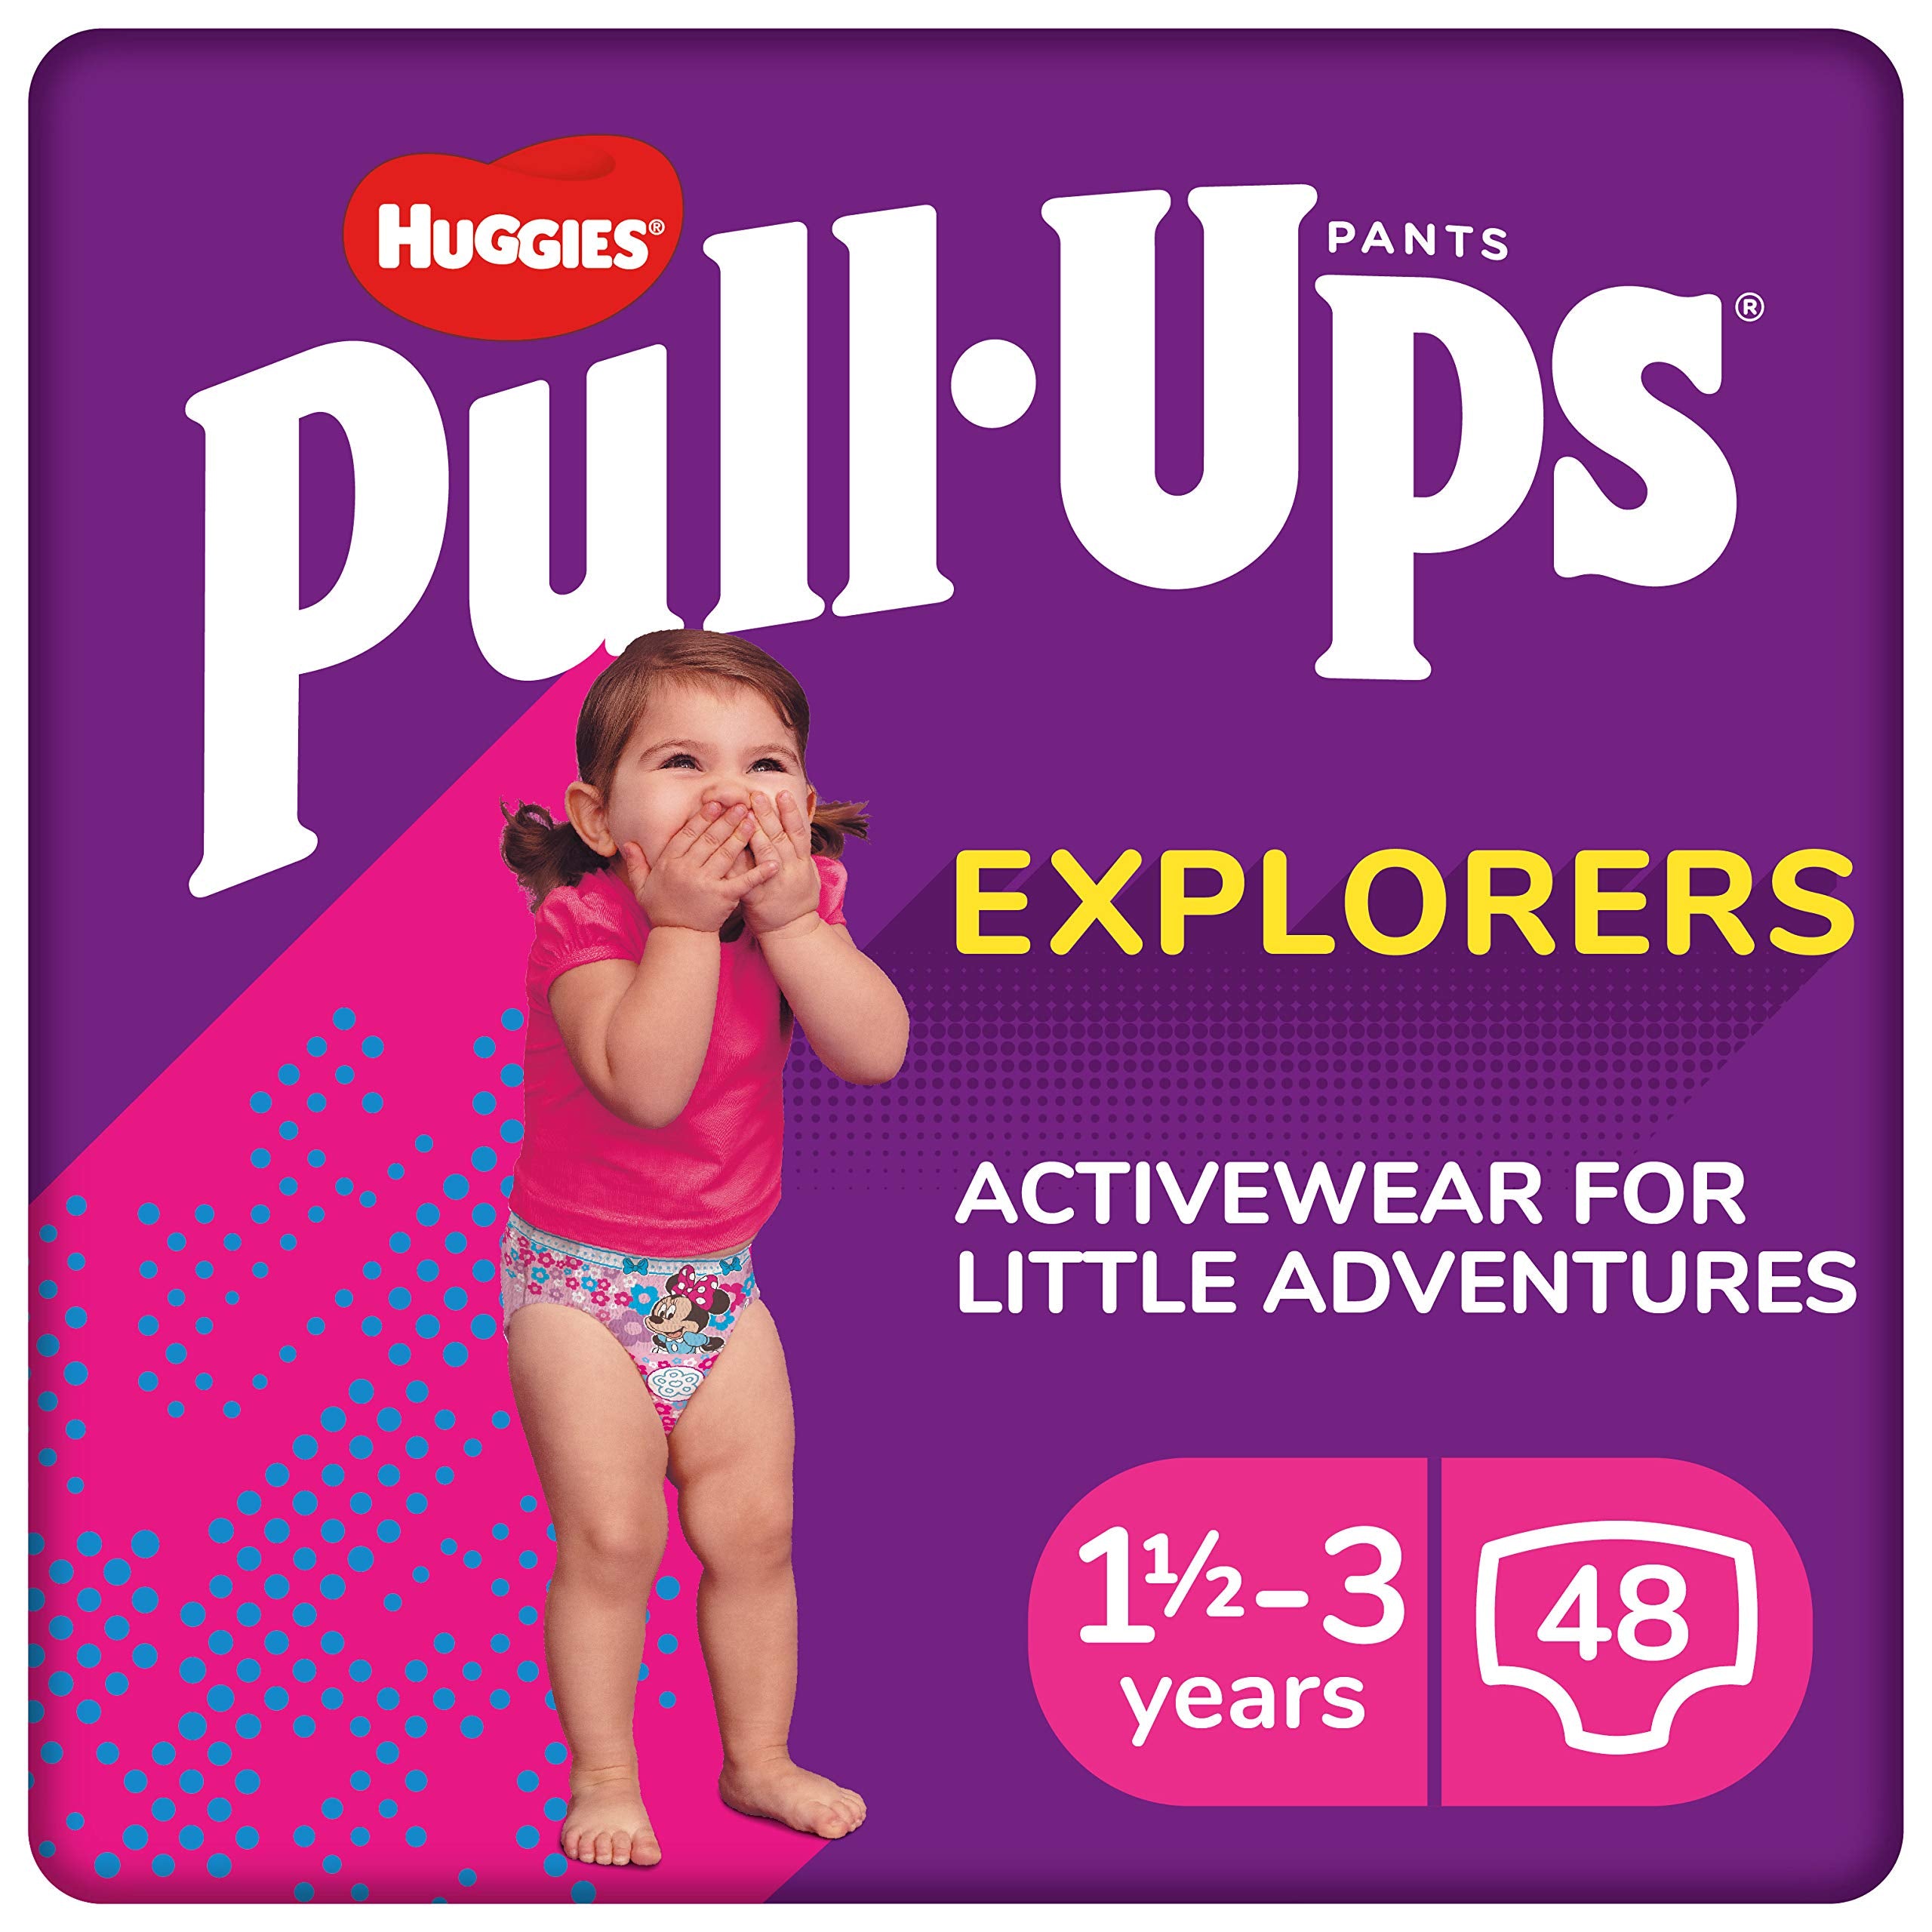 Huggies Pull-Ups, Explorers Nappy Pants for Girls - 1.5-3 Years, Size 5-6 Pull Ups (48 Pants) - Flex and Protect for Maximum Comfort - Pull Up Nappies with Potty Training Wetness Indicator